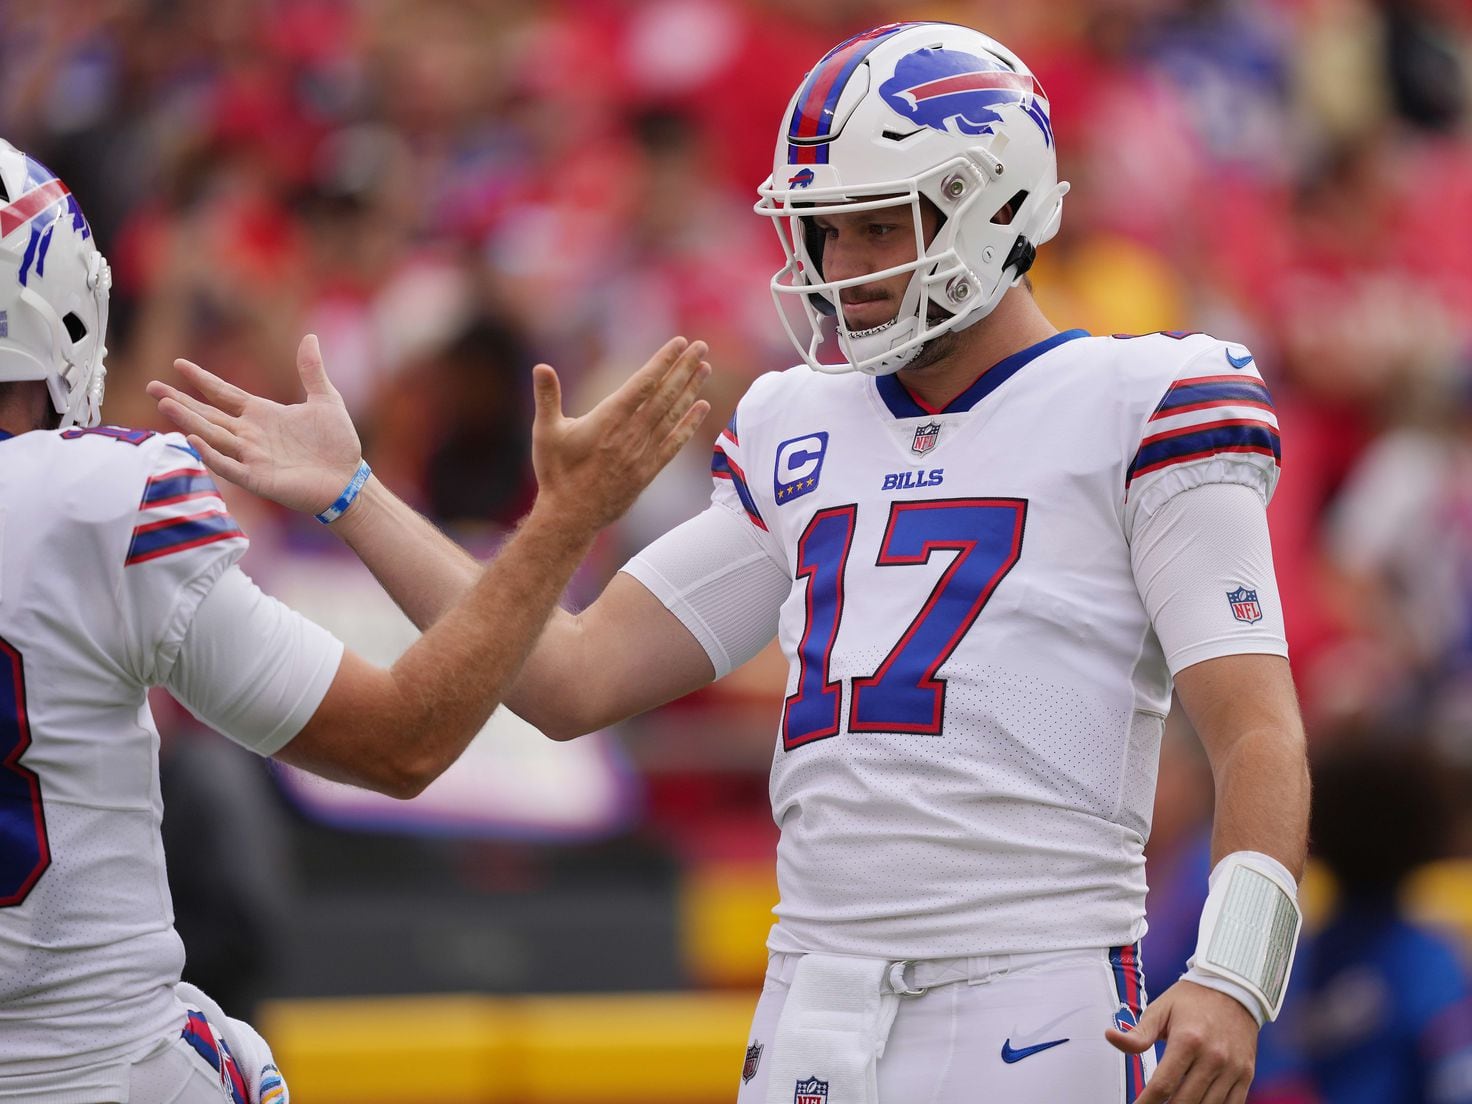 Chiefs vs. Bills Divisional playoff breakdown: two offenses on